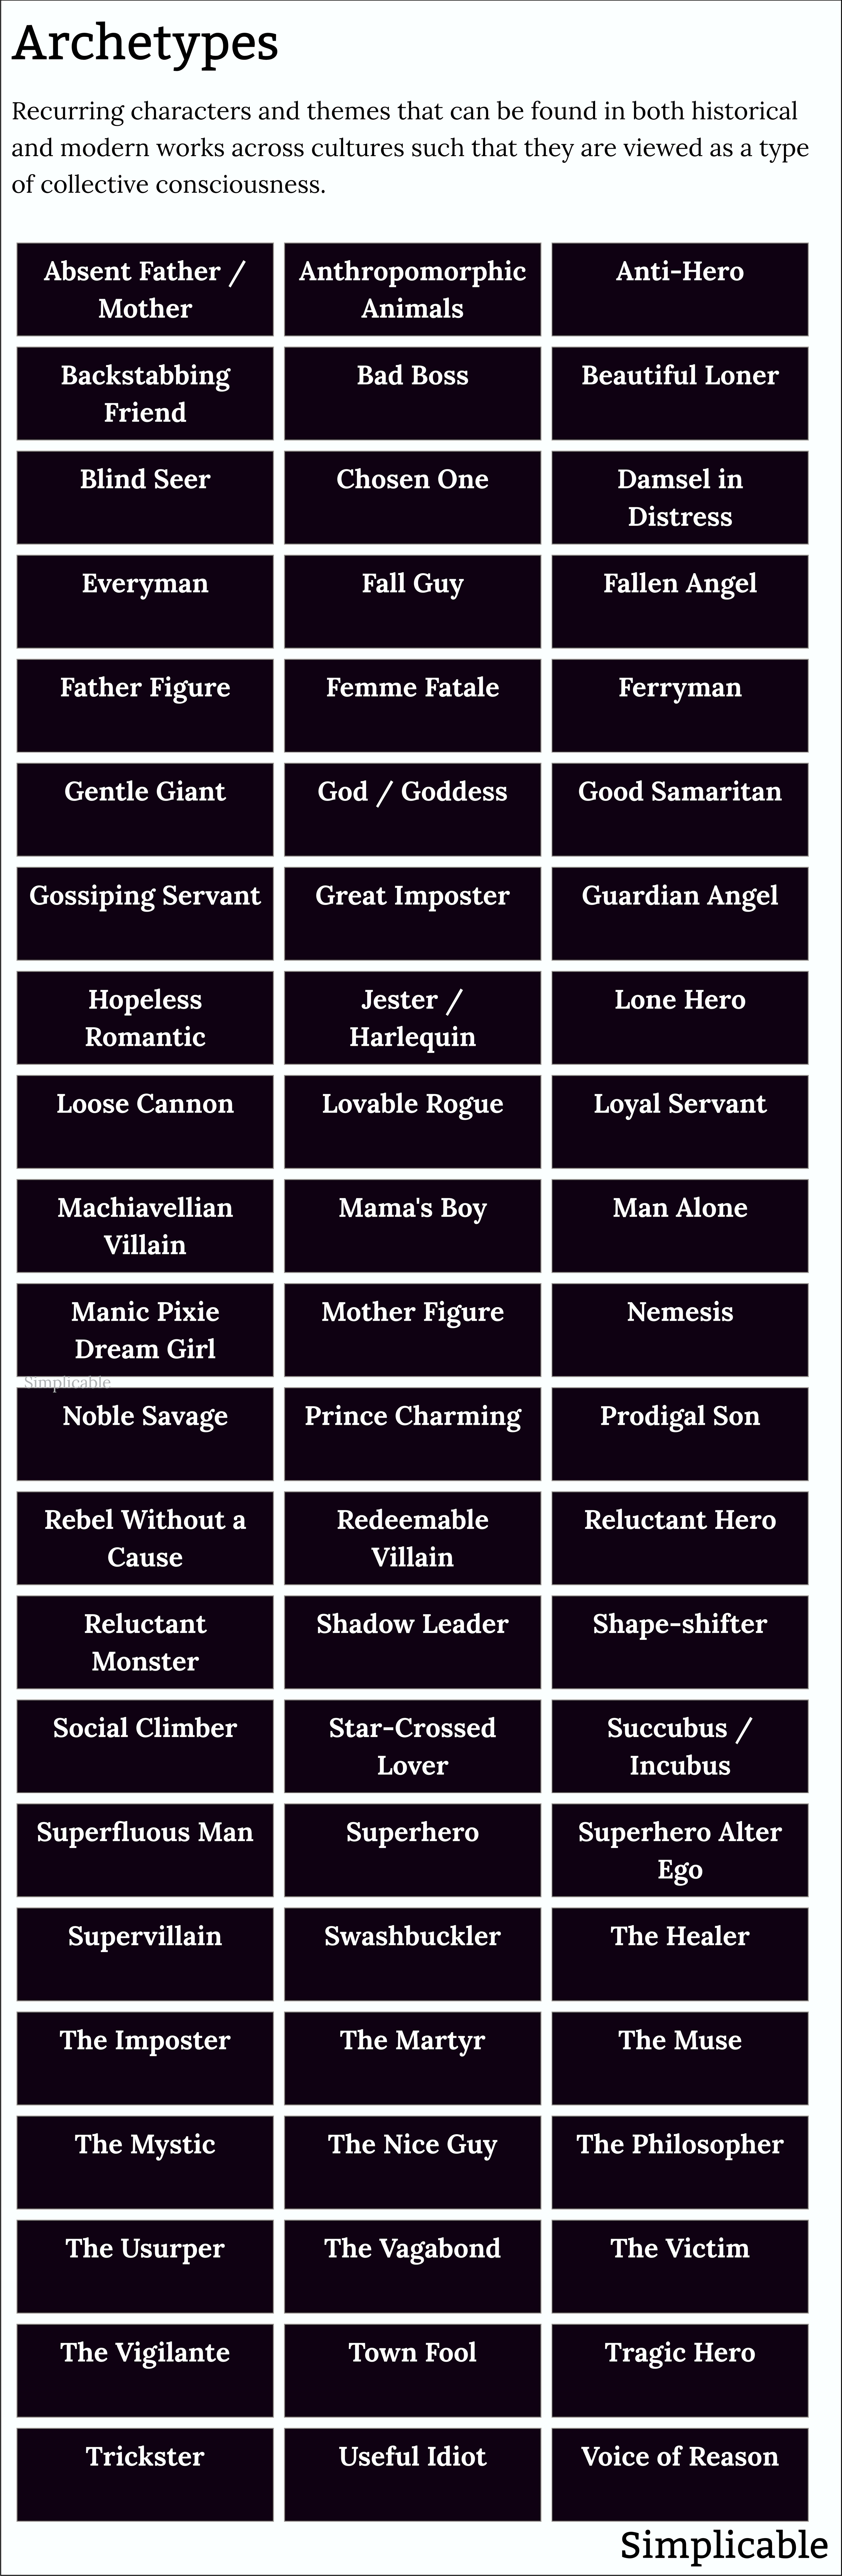 examples of Archetypes